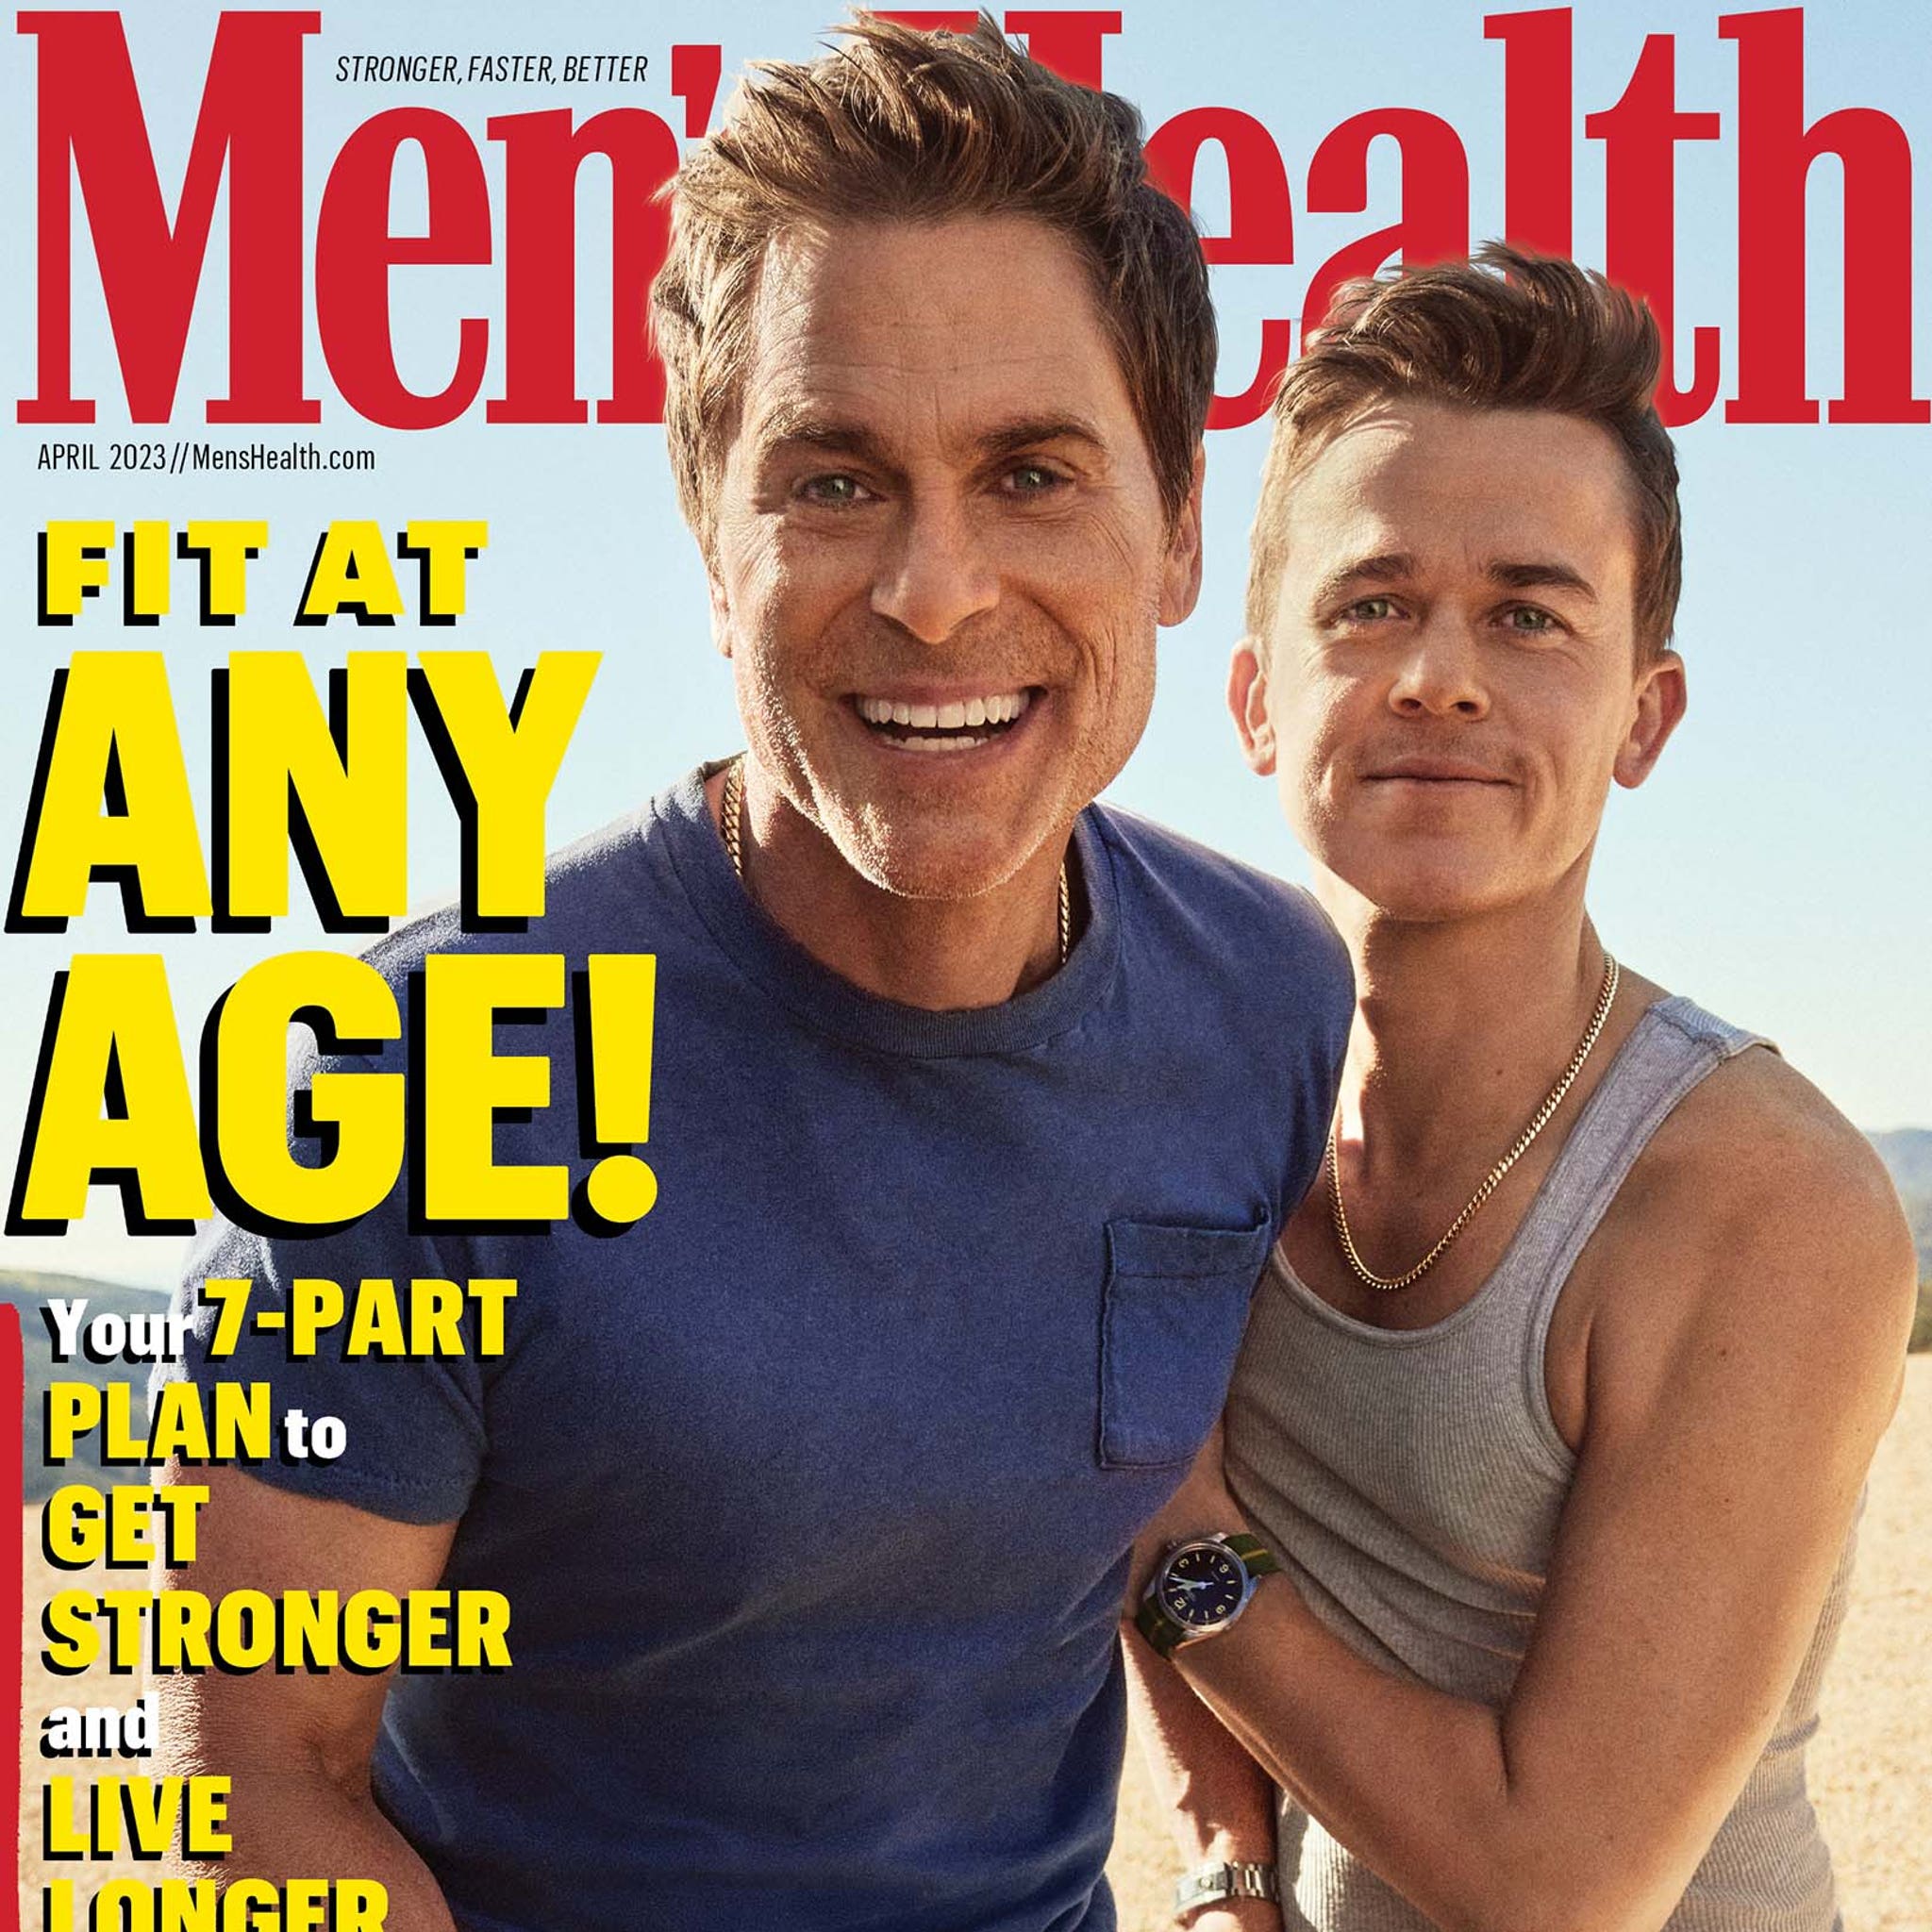 Rob Lowe Says Being a Dad to Post-College Kids is 'Whole Other Level